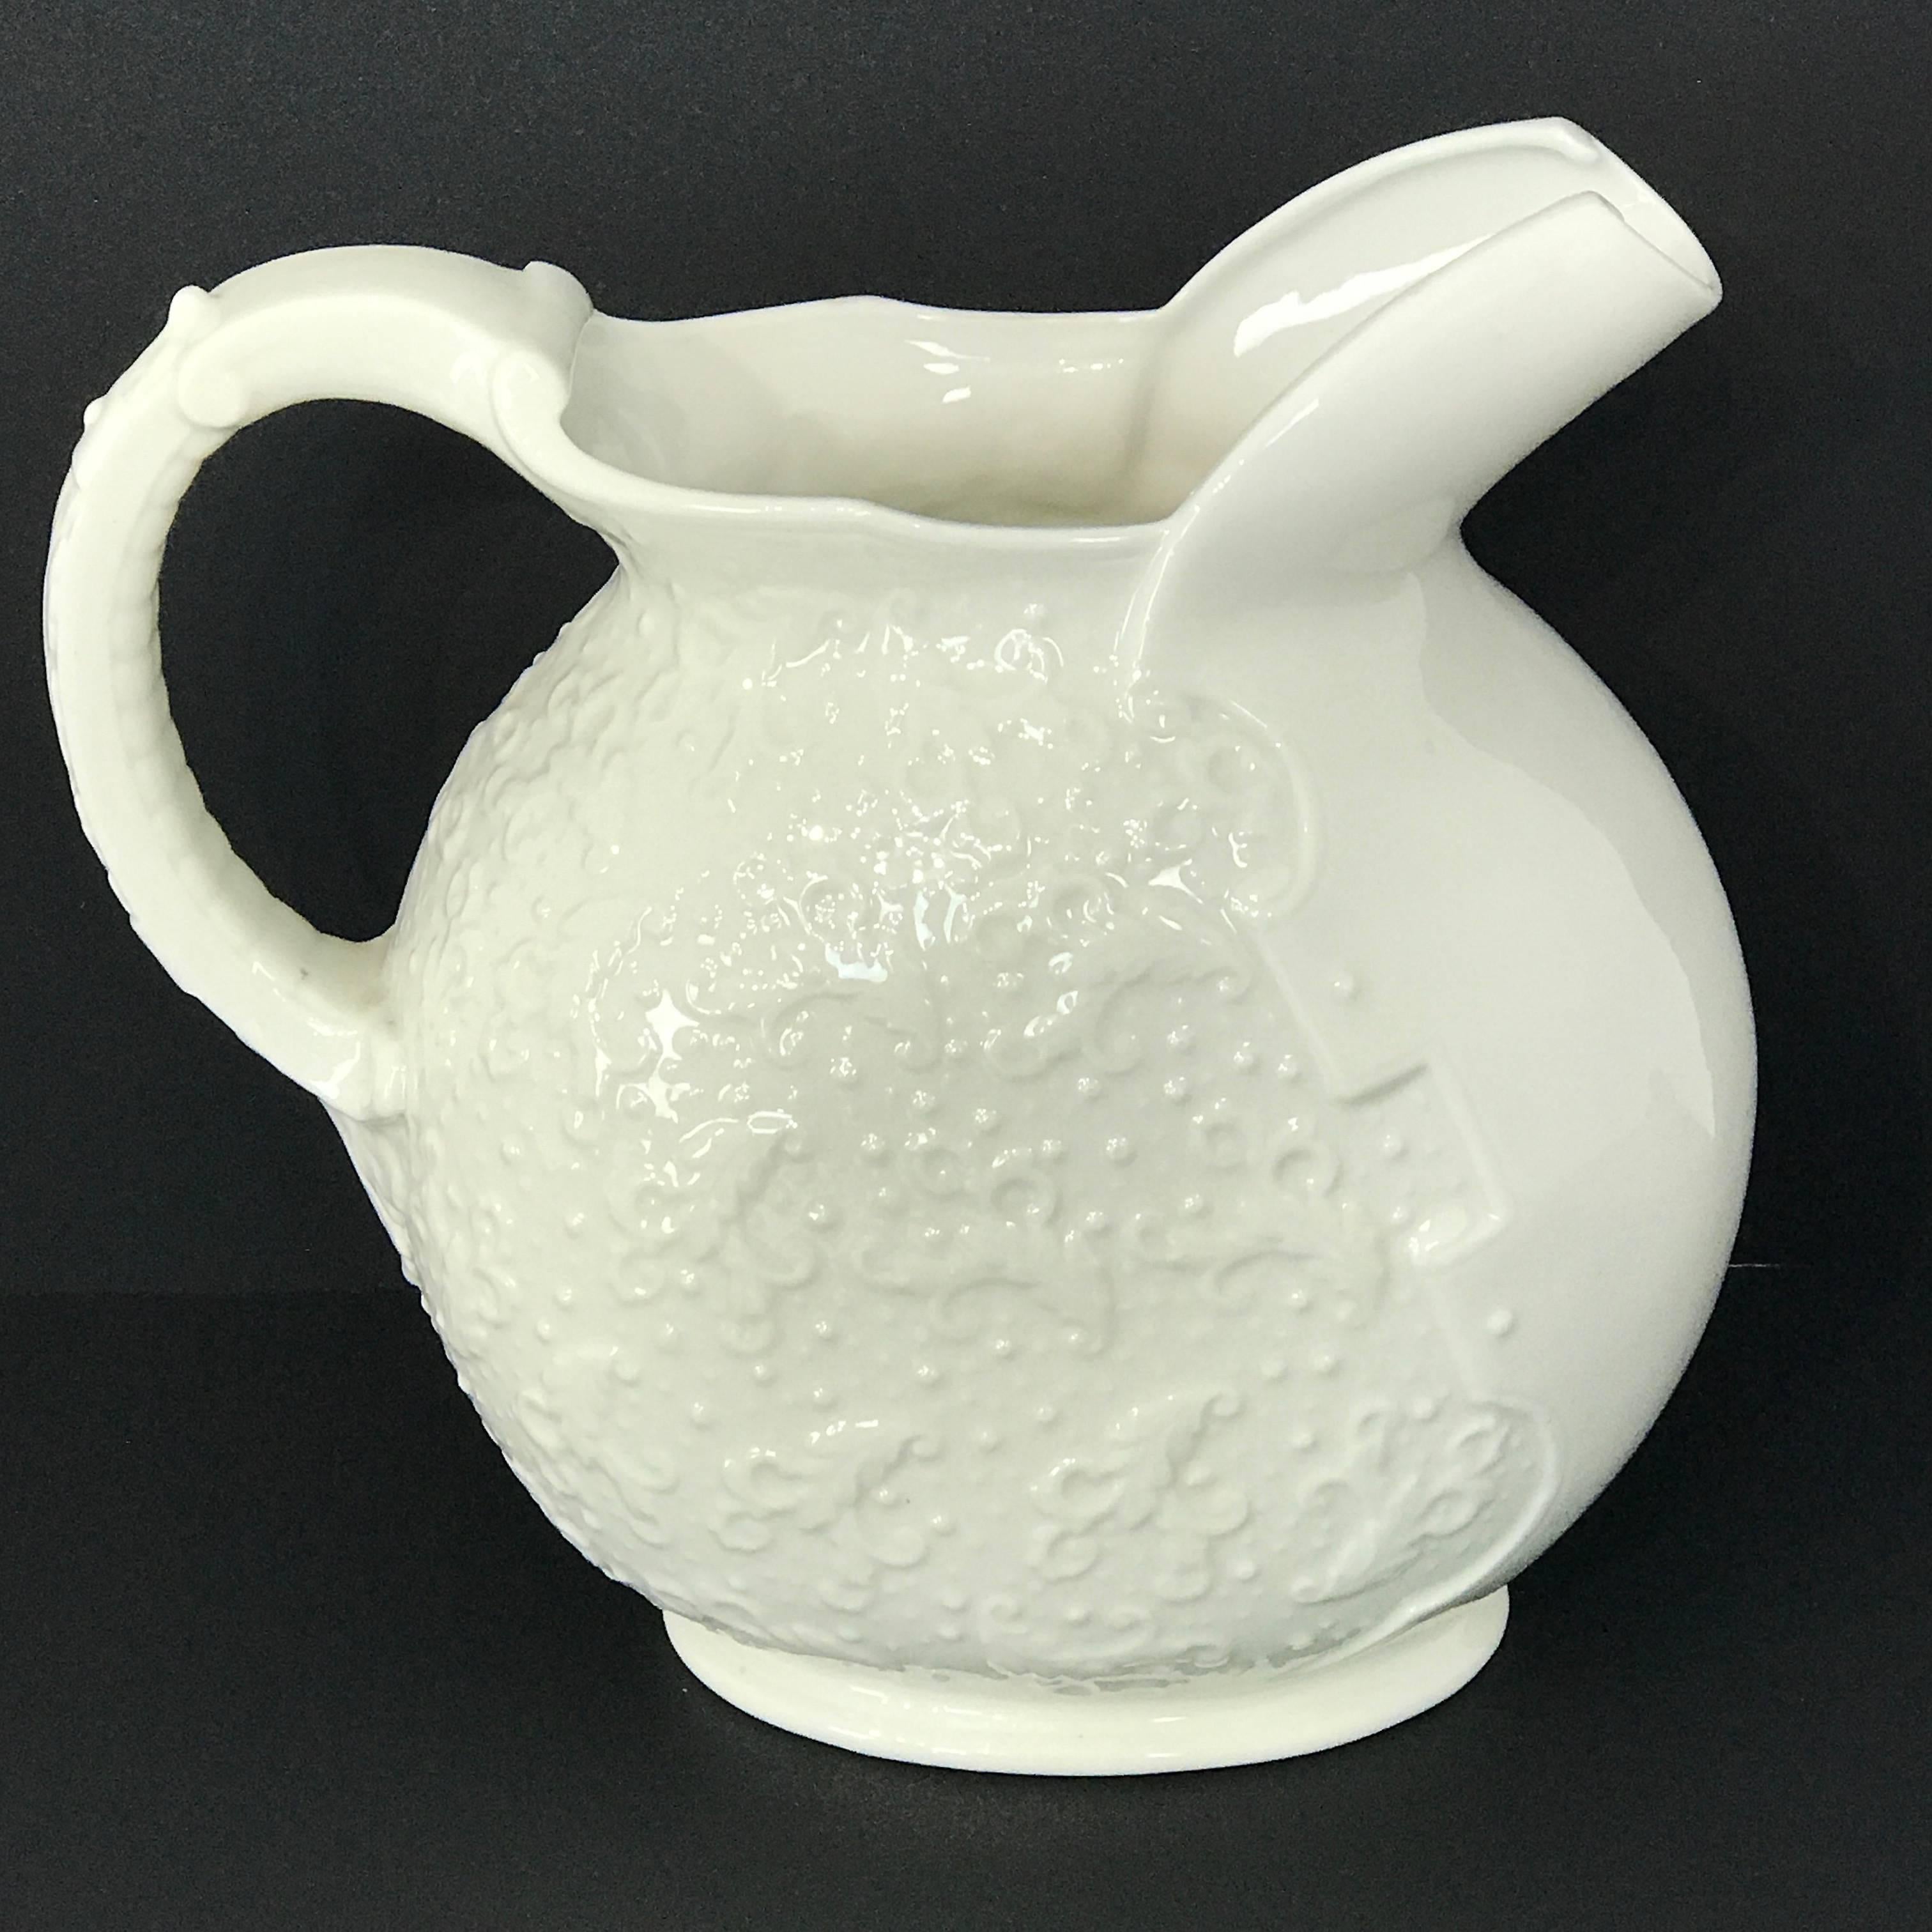 Aesthetic Movement Ott & Brewer Aesthetic Blanc de Chine Pitcher For Sale